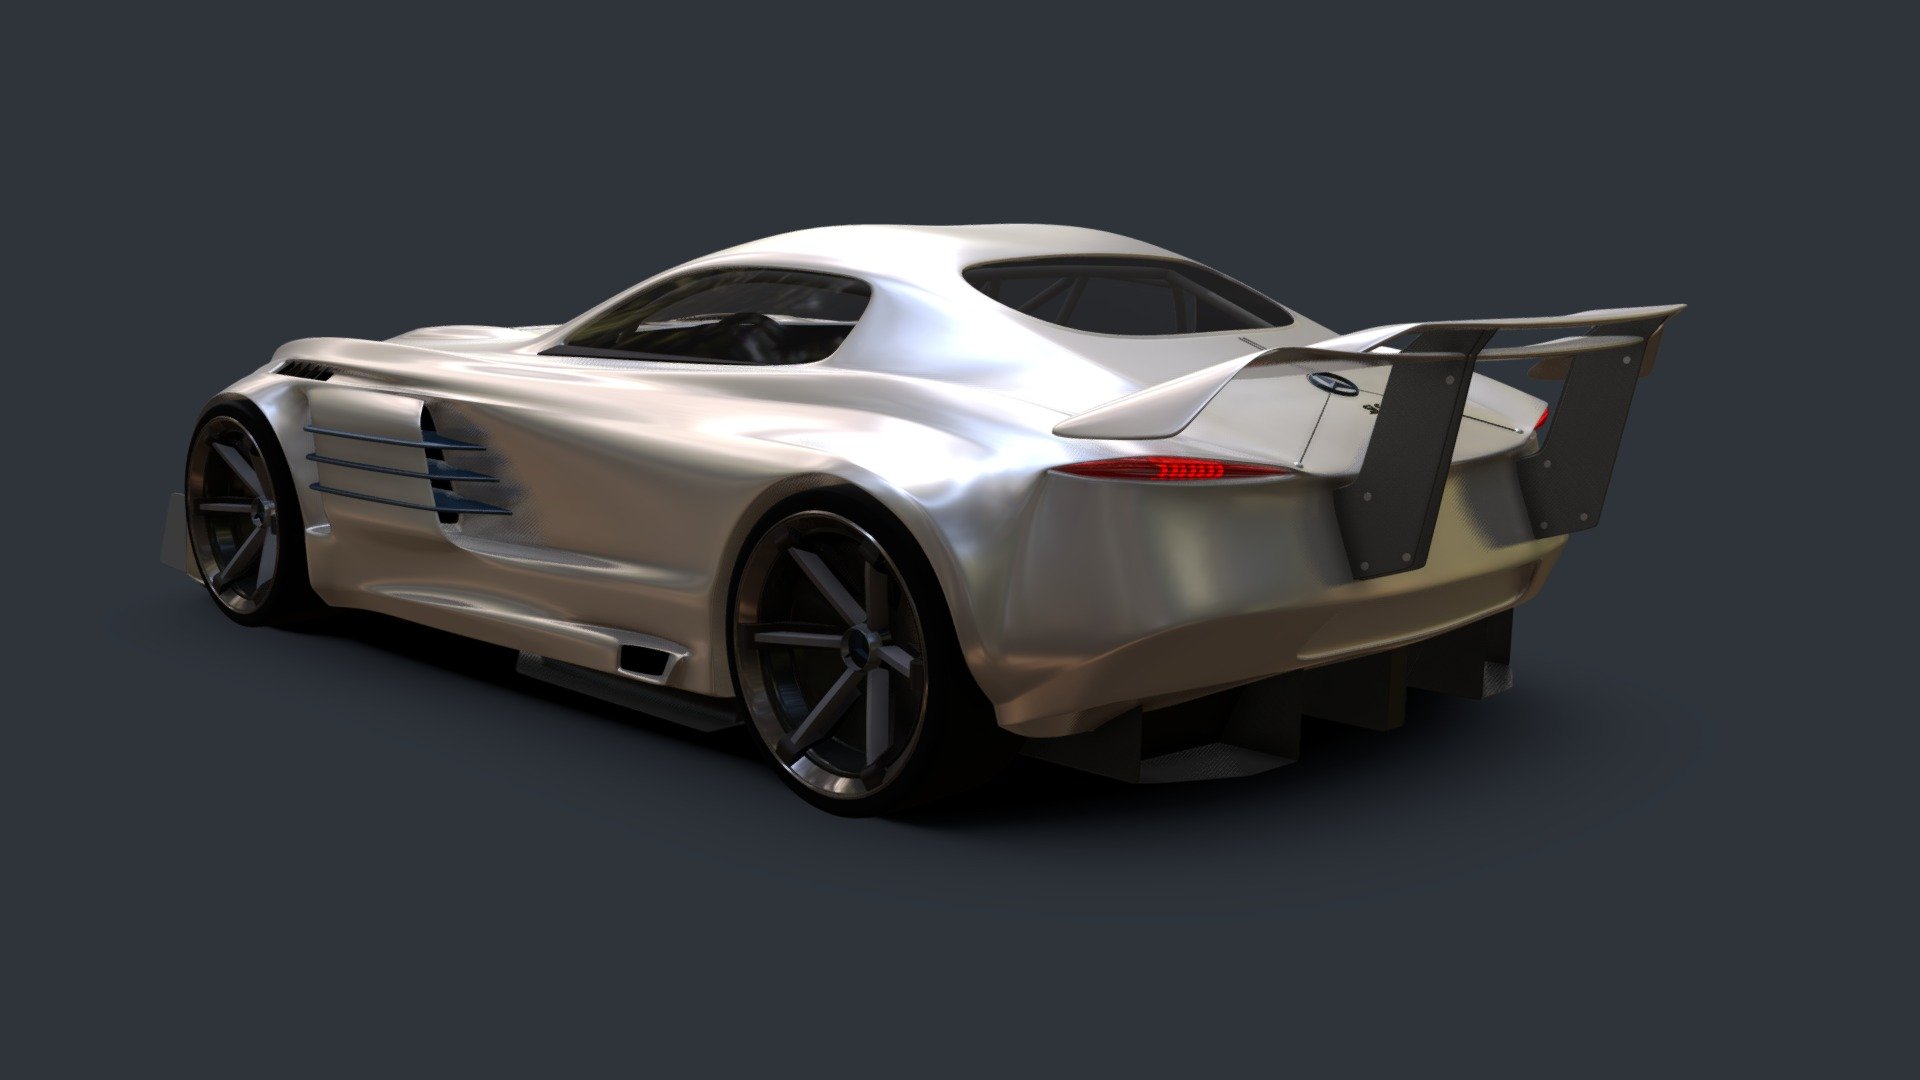 SLS AMG Gullwing concept - Race Variant